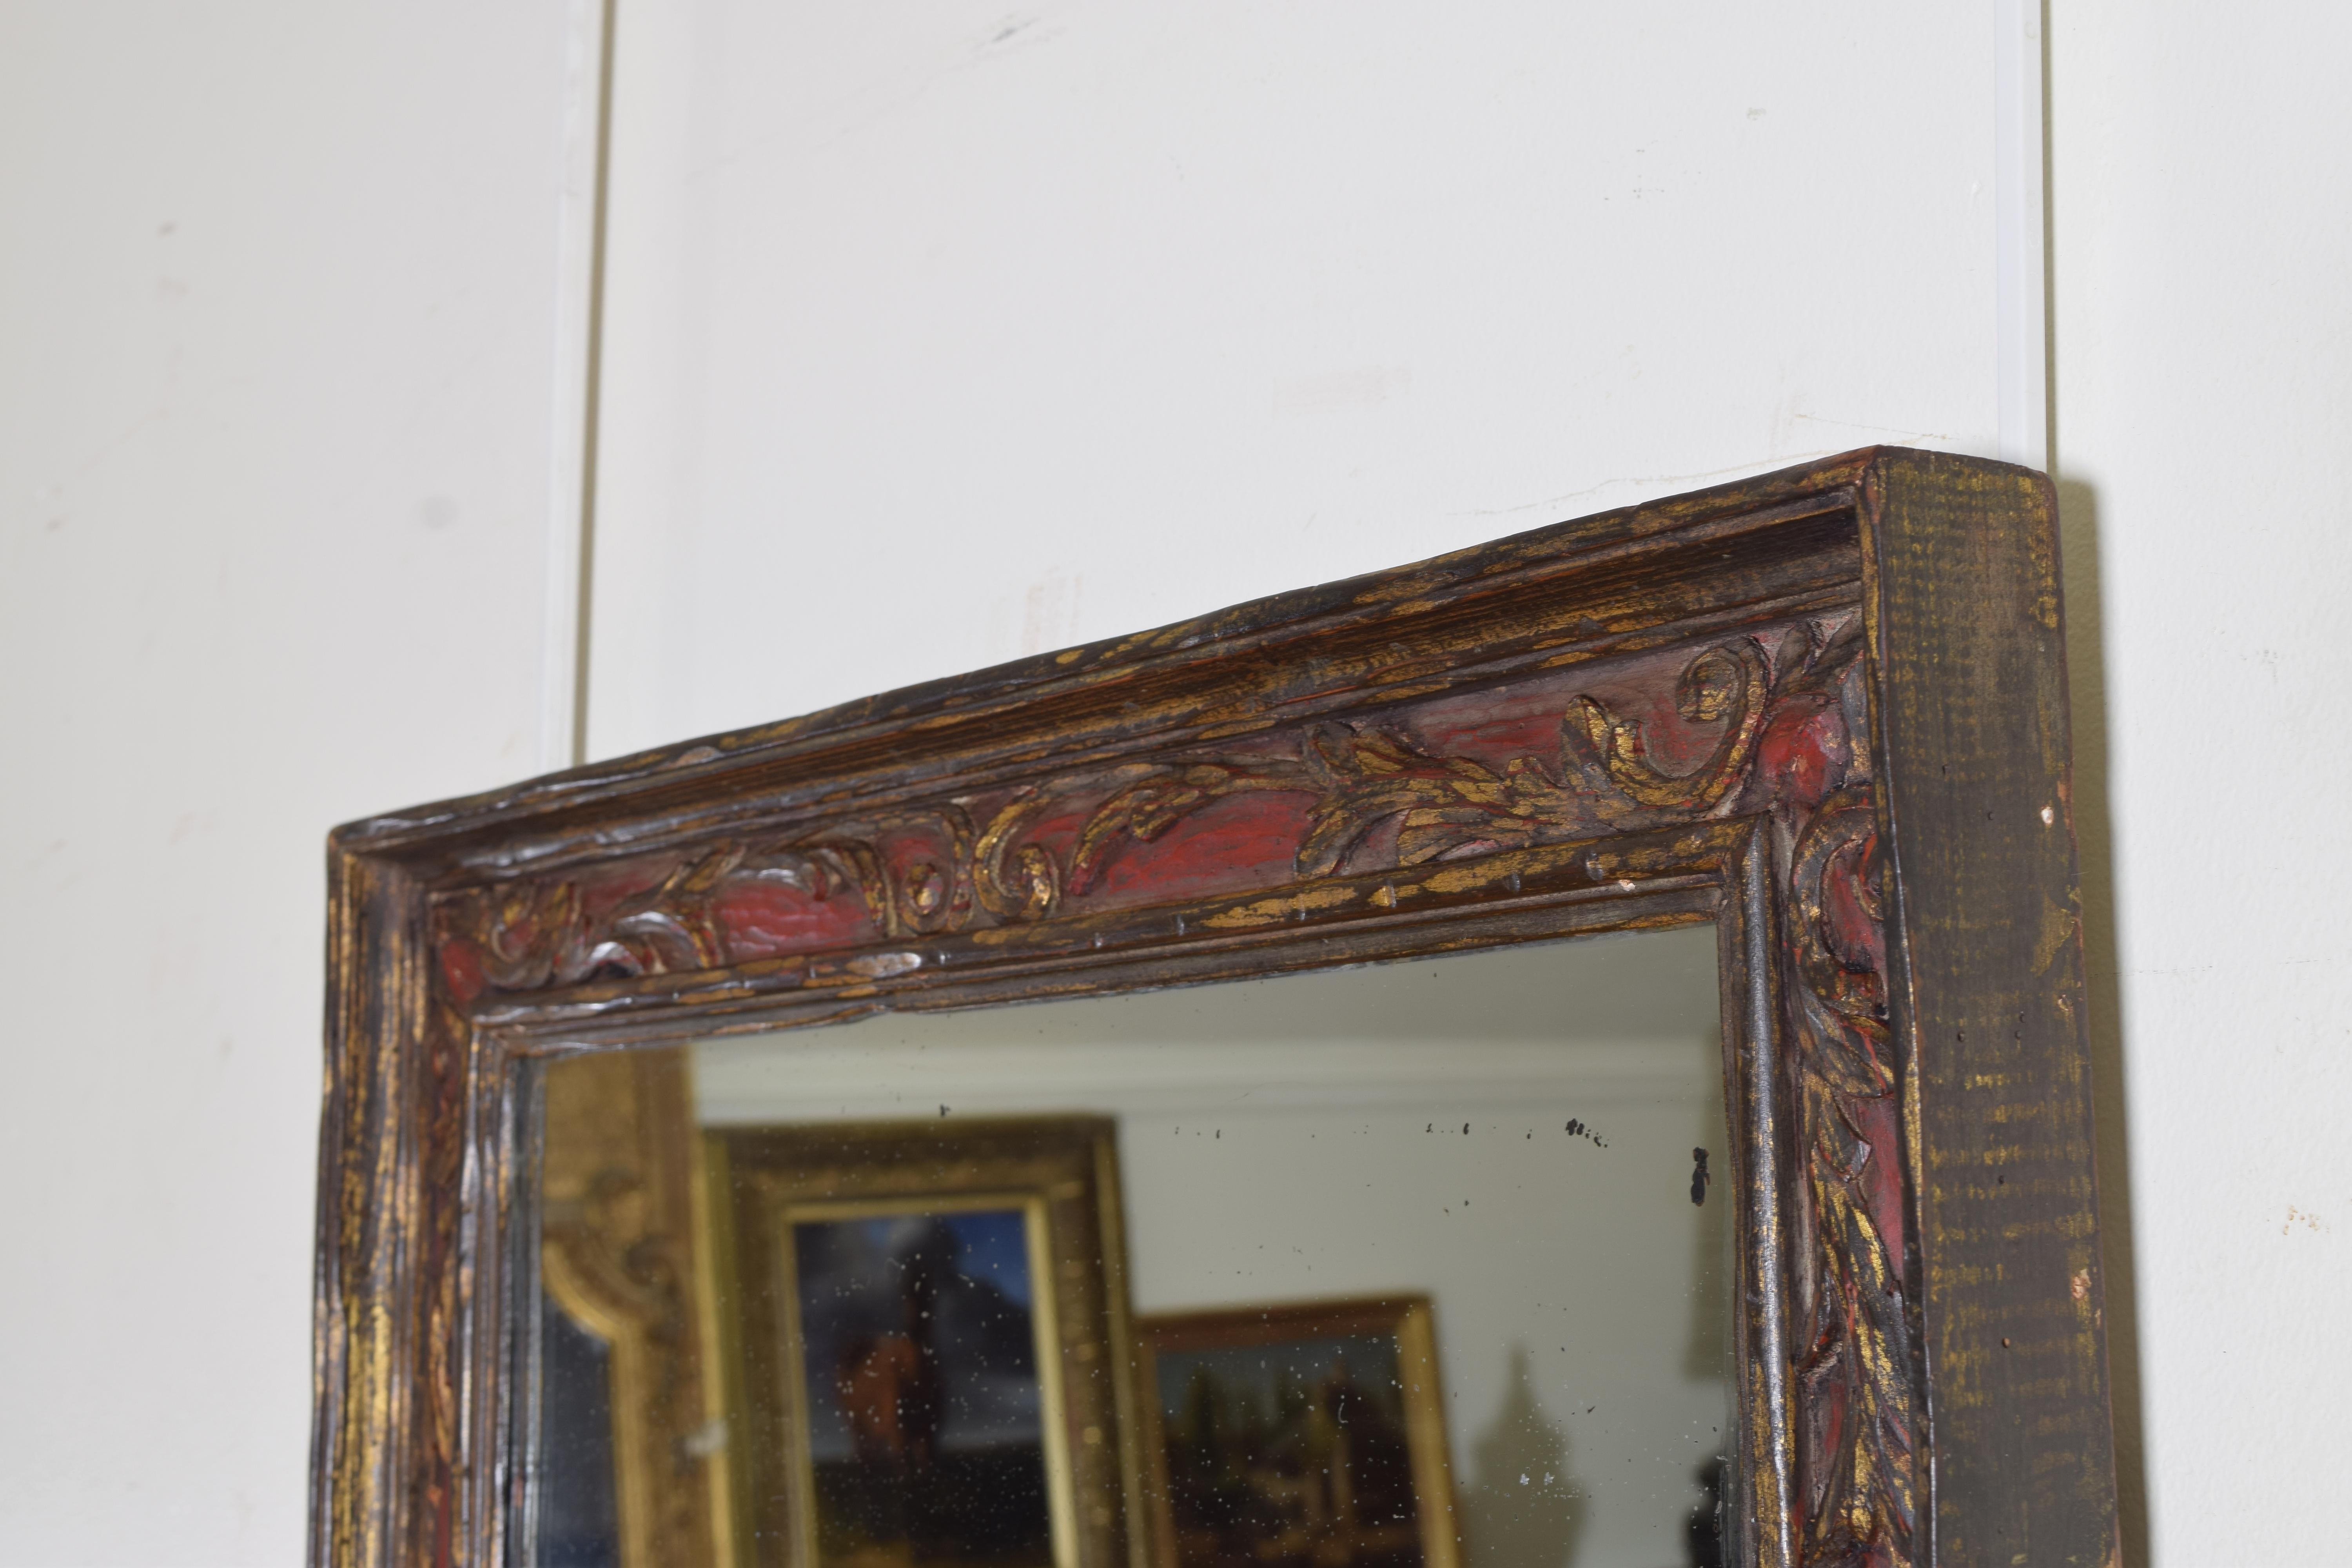 Late 19th Century Spanish Baroque Revival Period Carved Giltwood & Painted Wood Mirror, Late 19thc